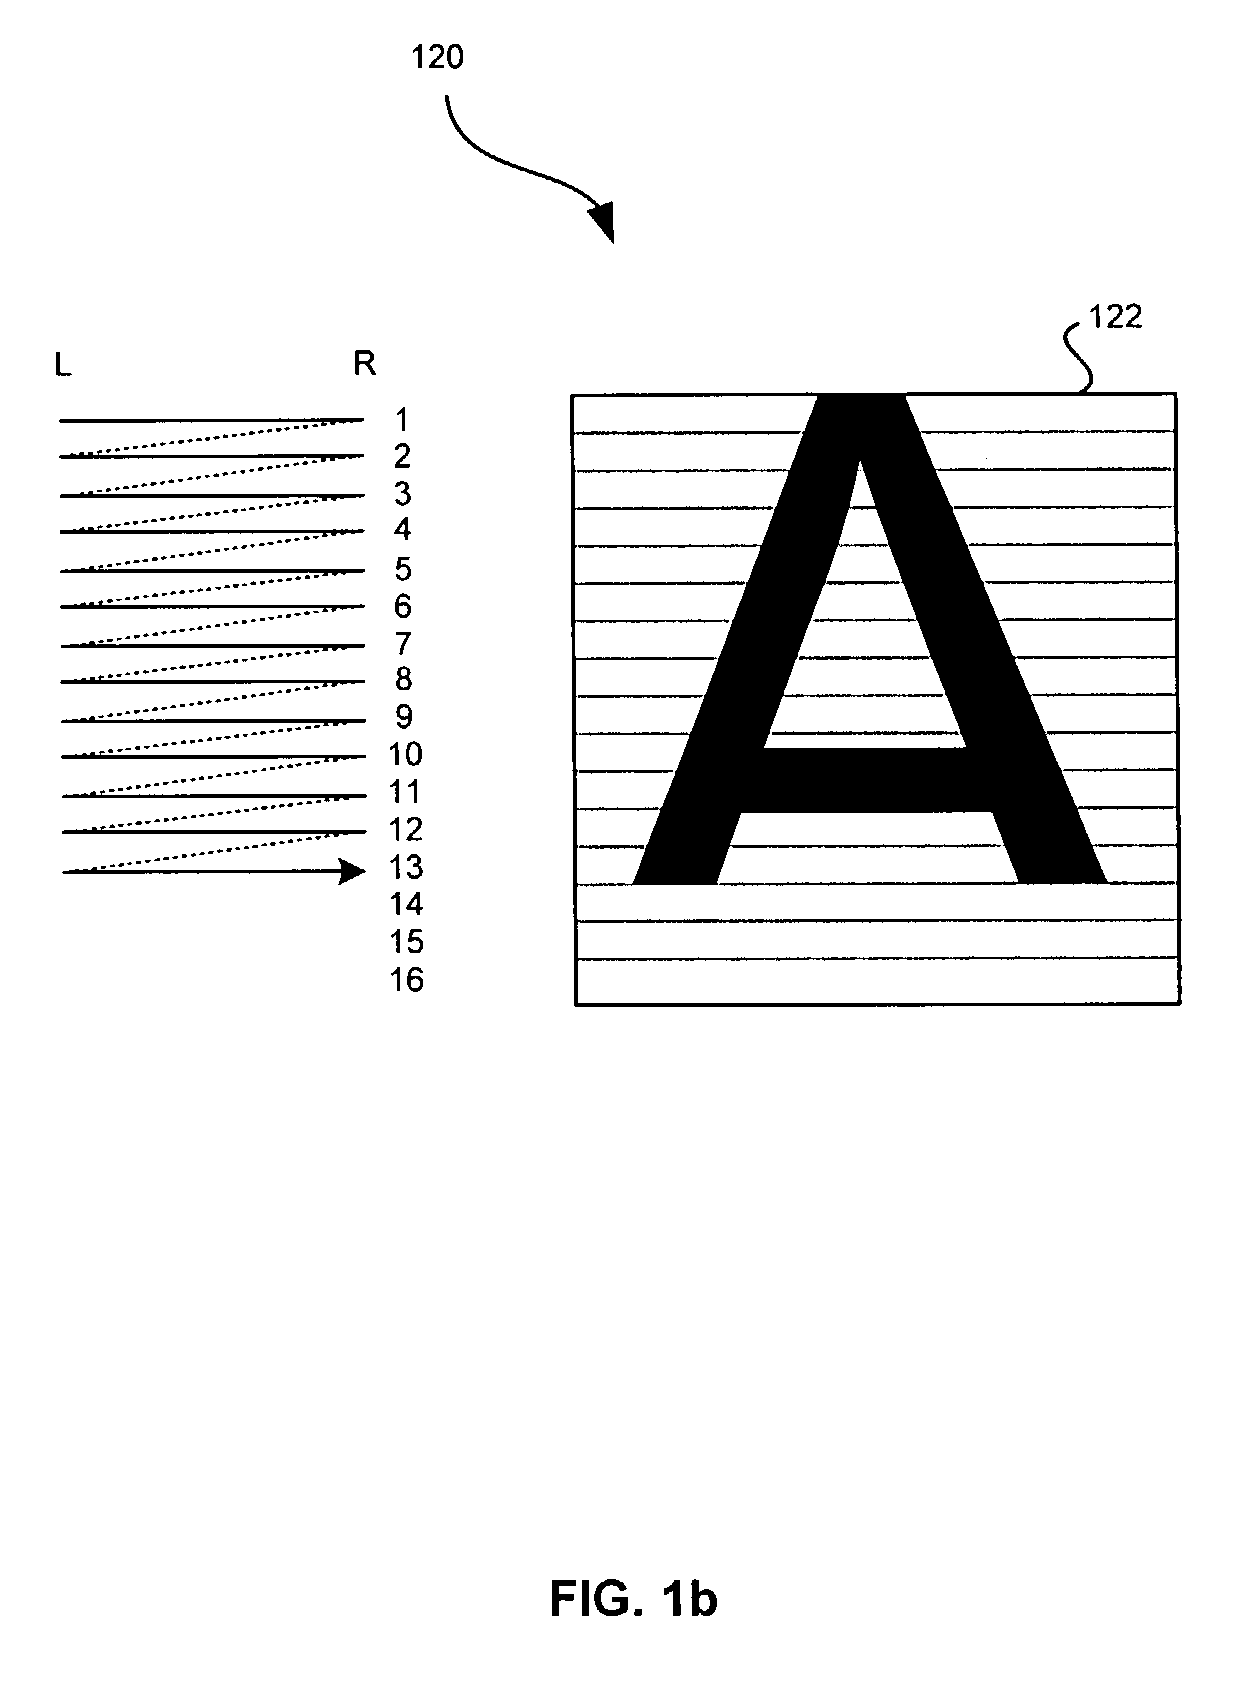 Method and system for converting interlaced formatted video to progressive scan video using a color edge detection scheme